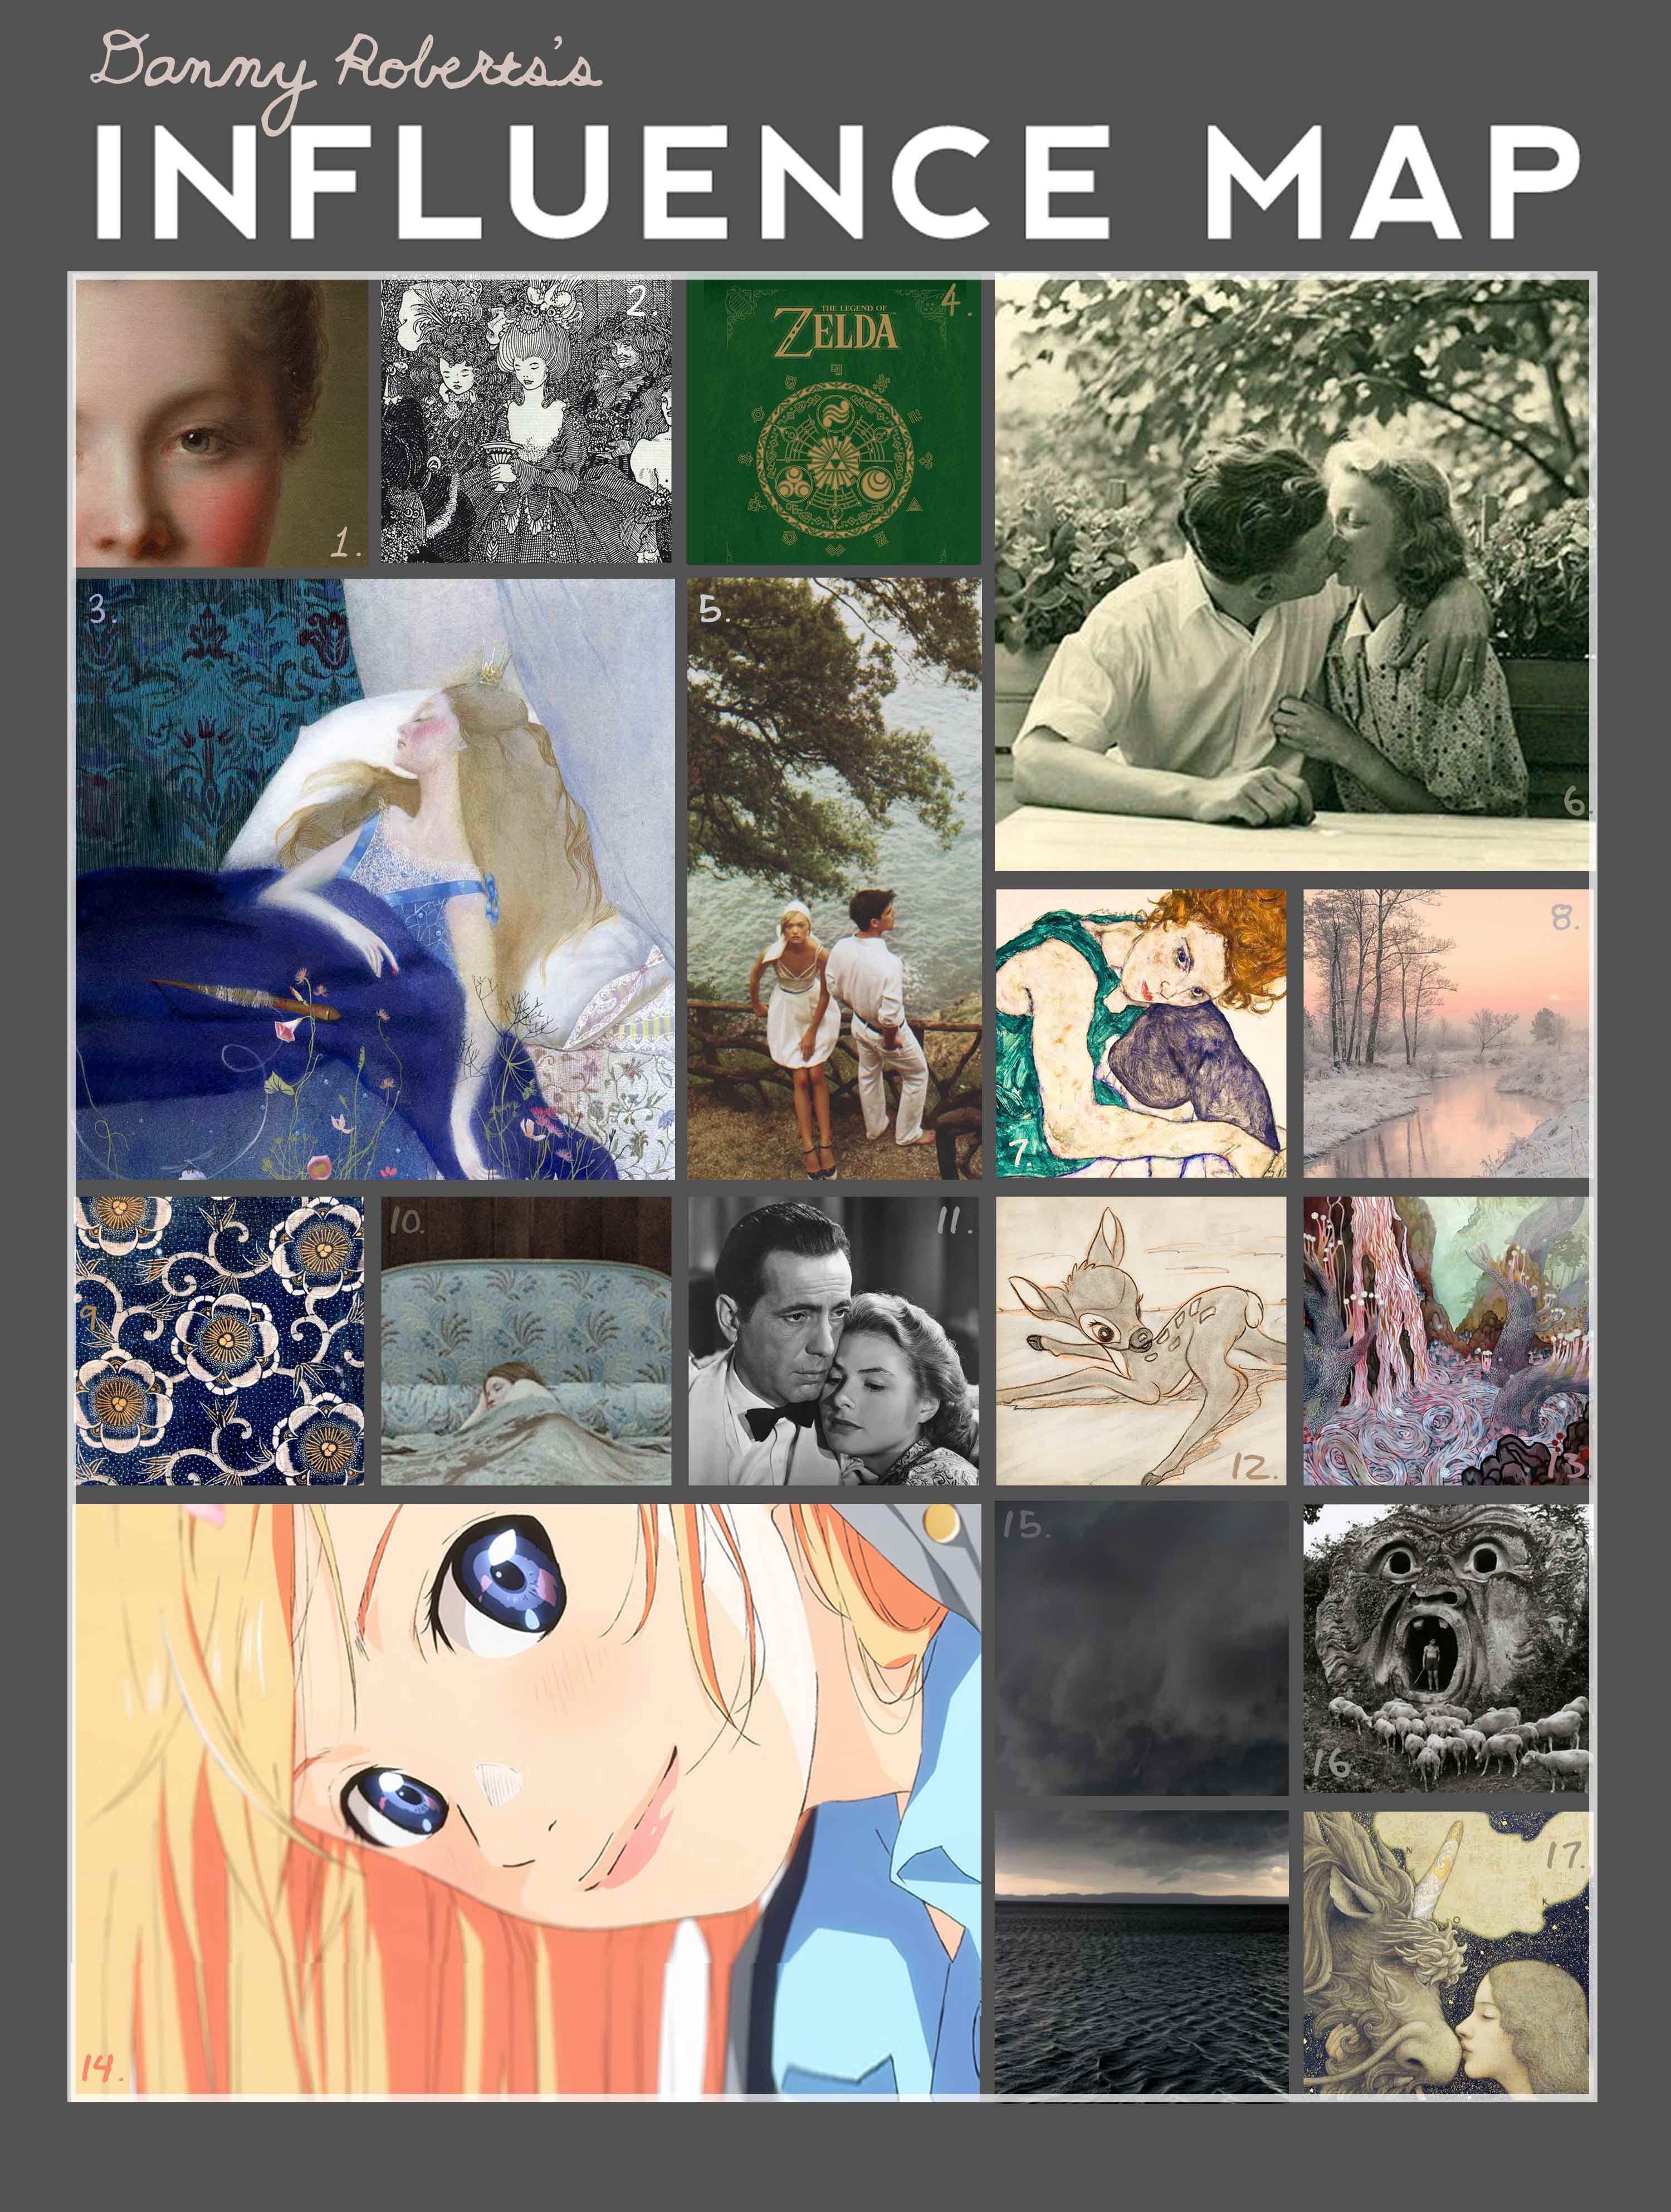 Artist Danny Roberts influence map images of images representing concepts and themes